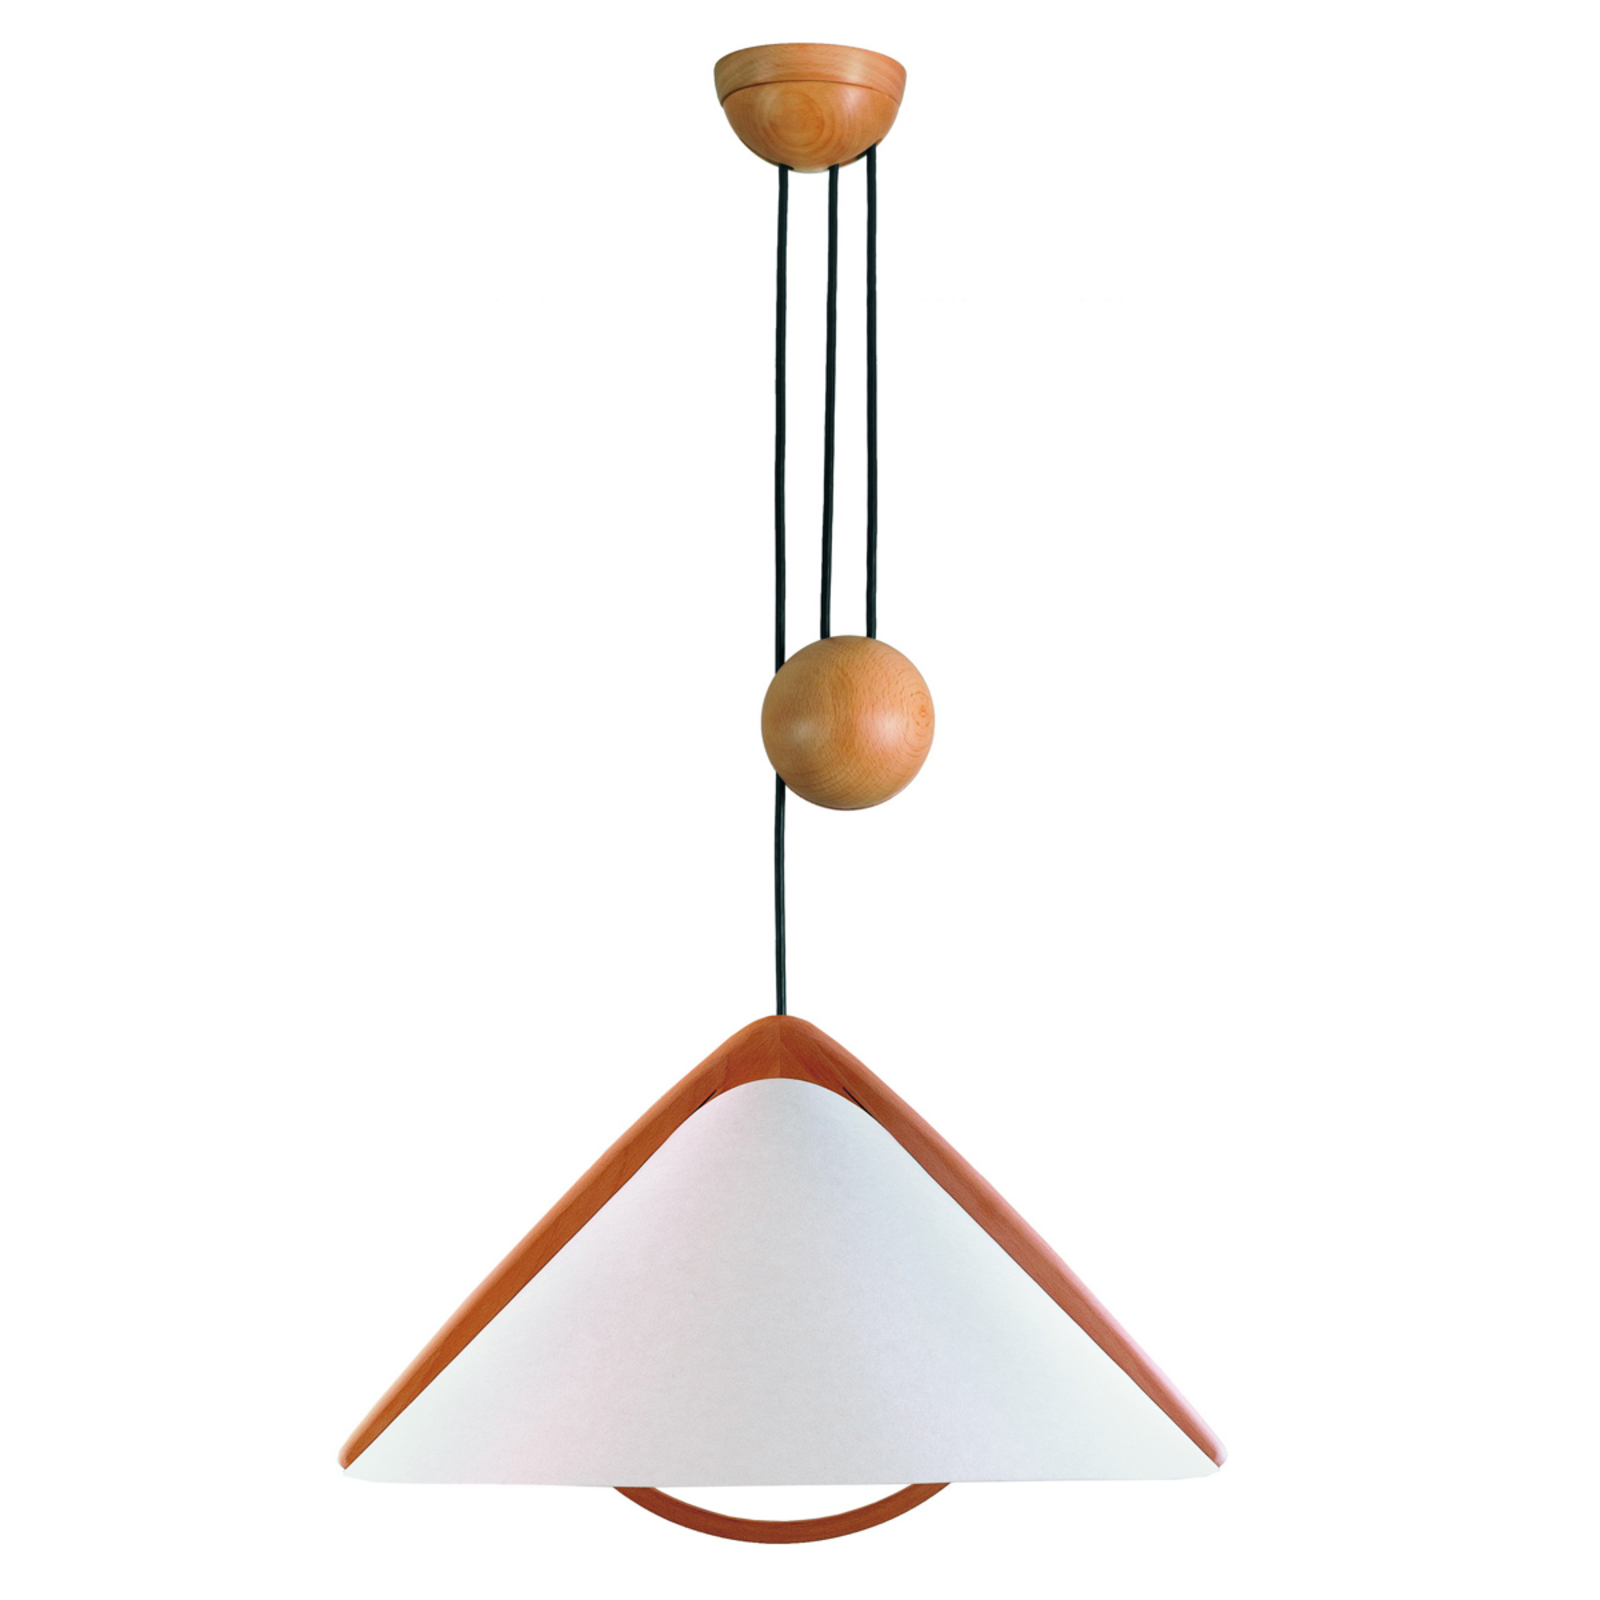 Rope pull light Pila with lunopal lampshade